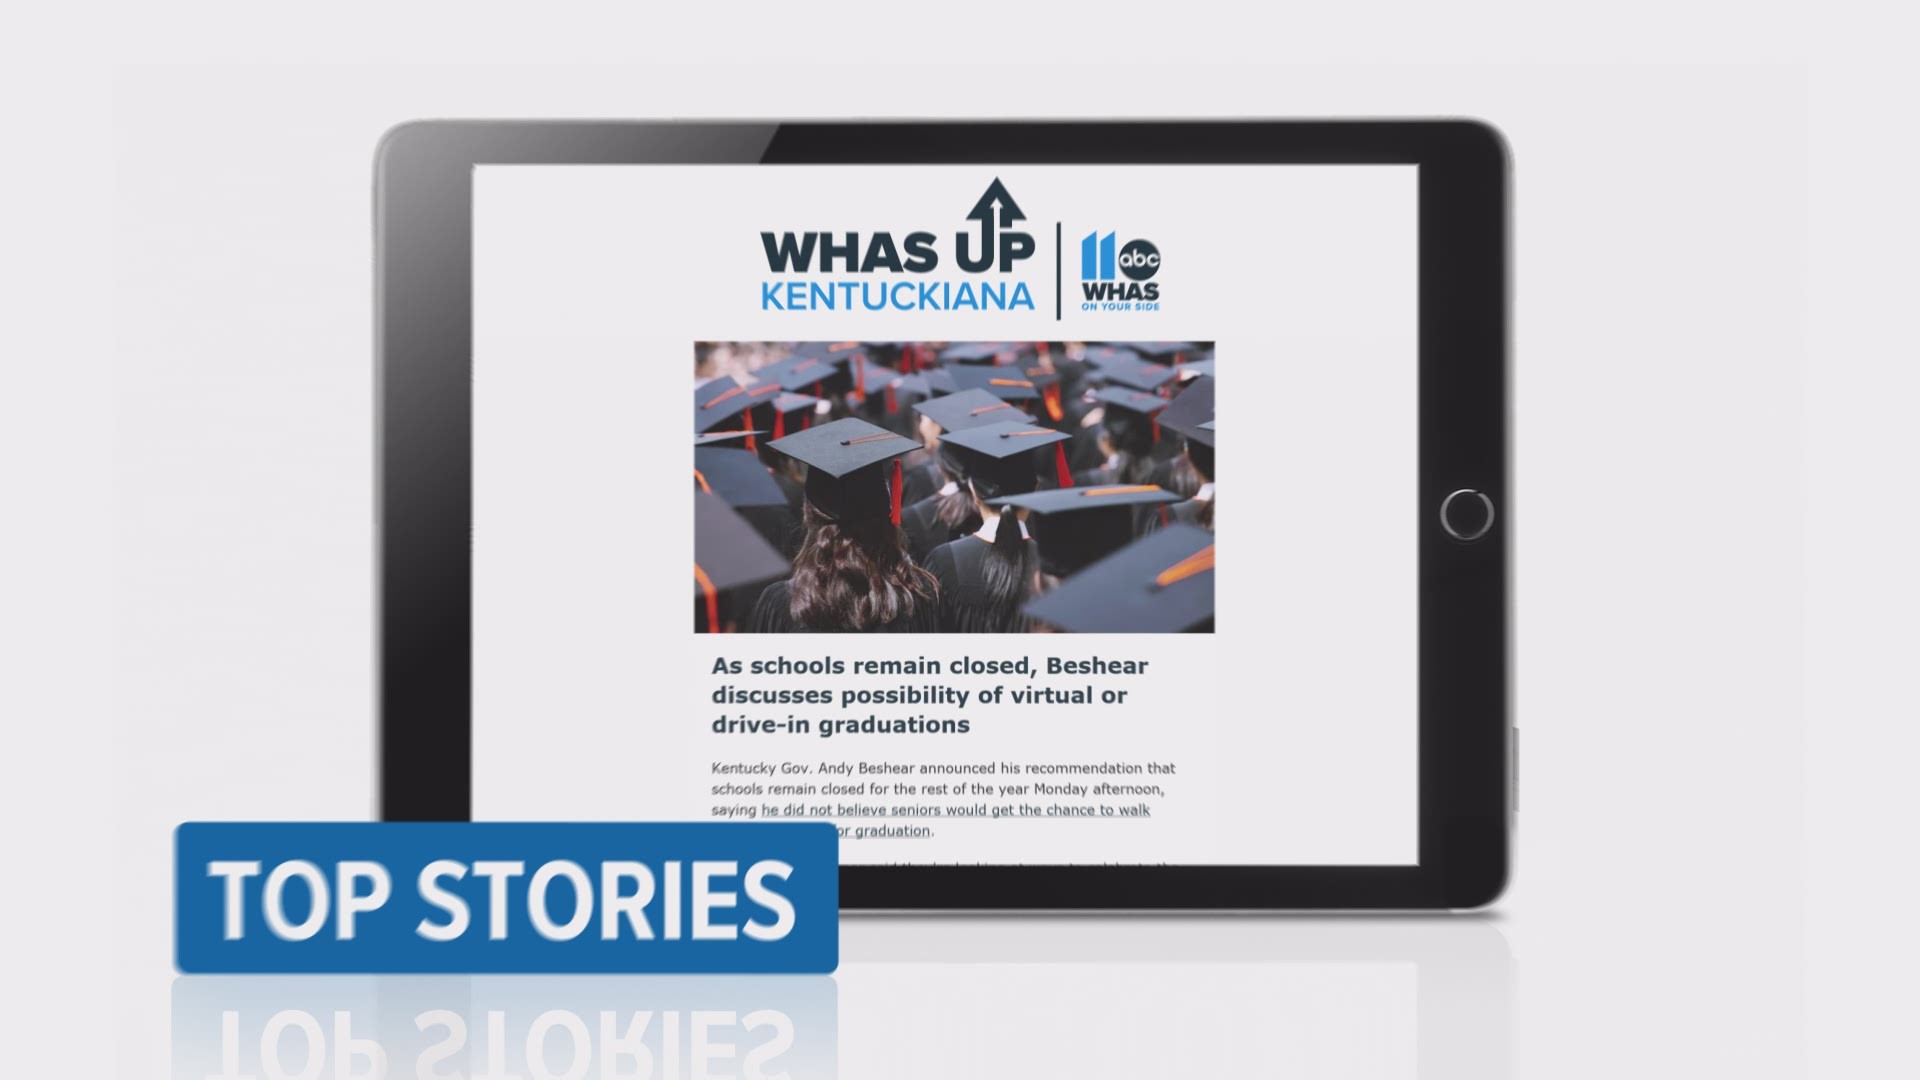 Get WHAS Up Kentuckiana—our newsletter delivered directly to your inbox. We'll give you the day's top stories, the forecast and Video of the day.